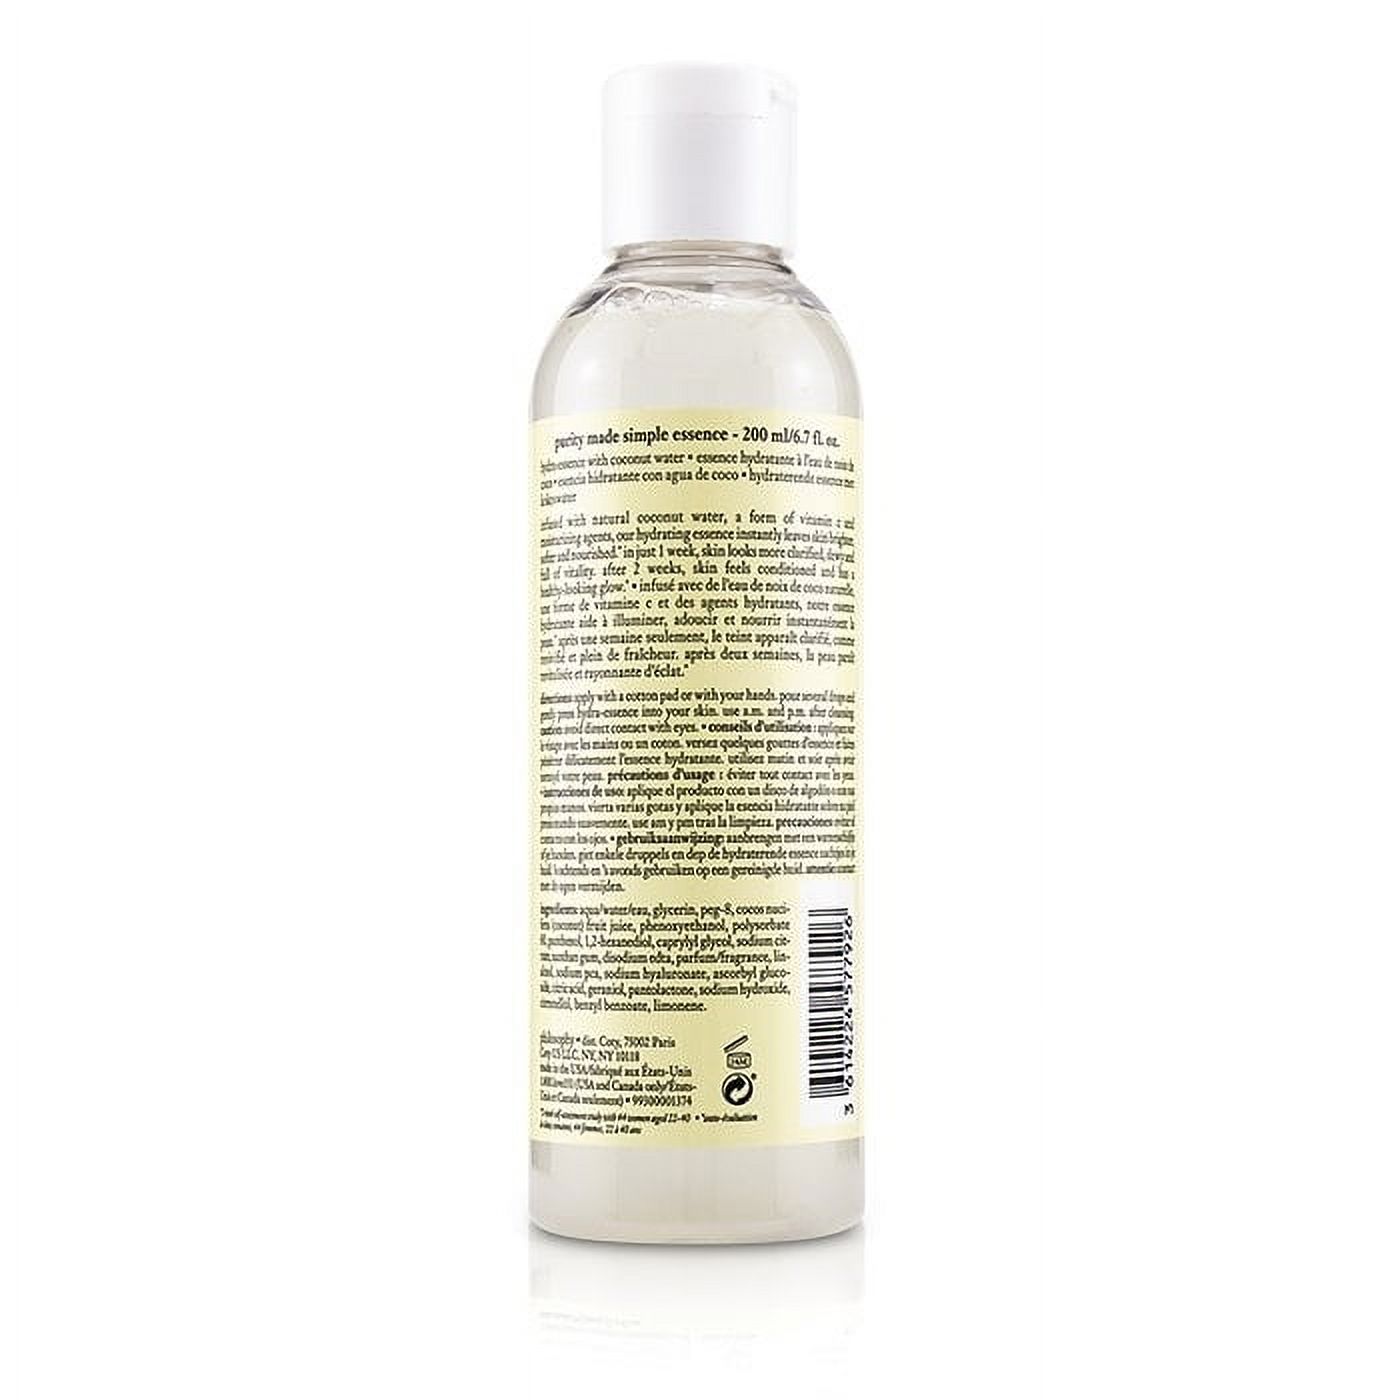 Philosophy Purity Made Simple HydraEssence With Coconut Water, 6.7 Oz - image 2 of 2